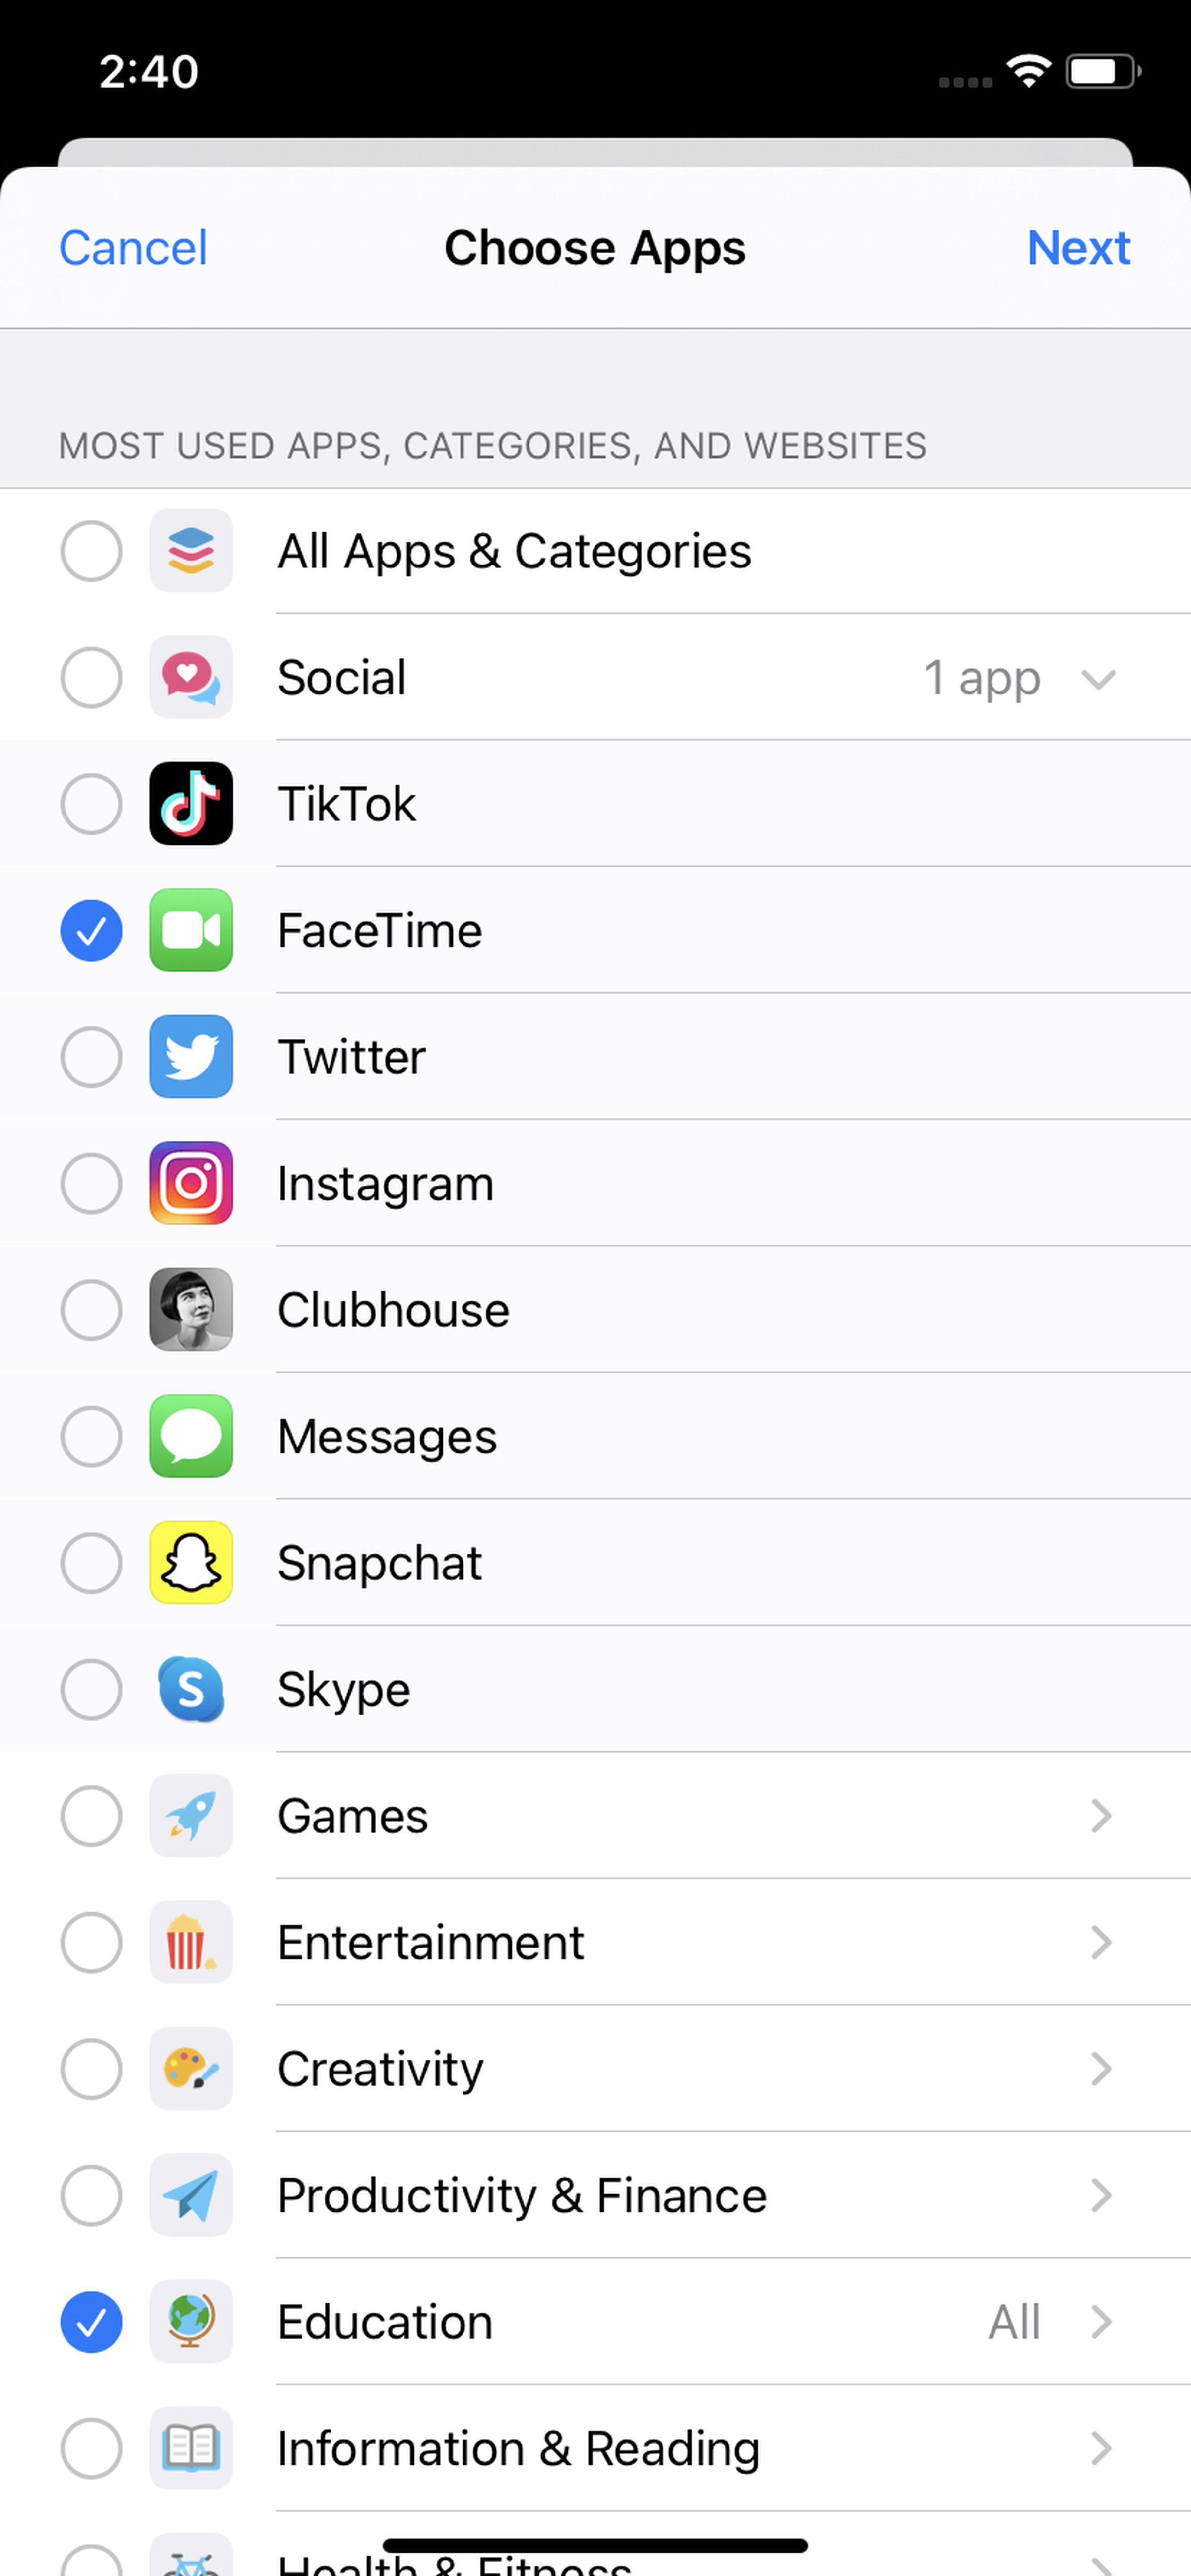 You can limit specific apps or a category of apps